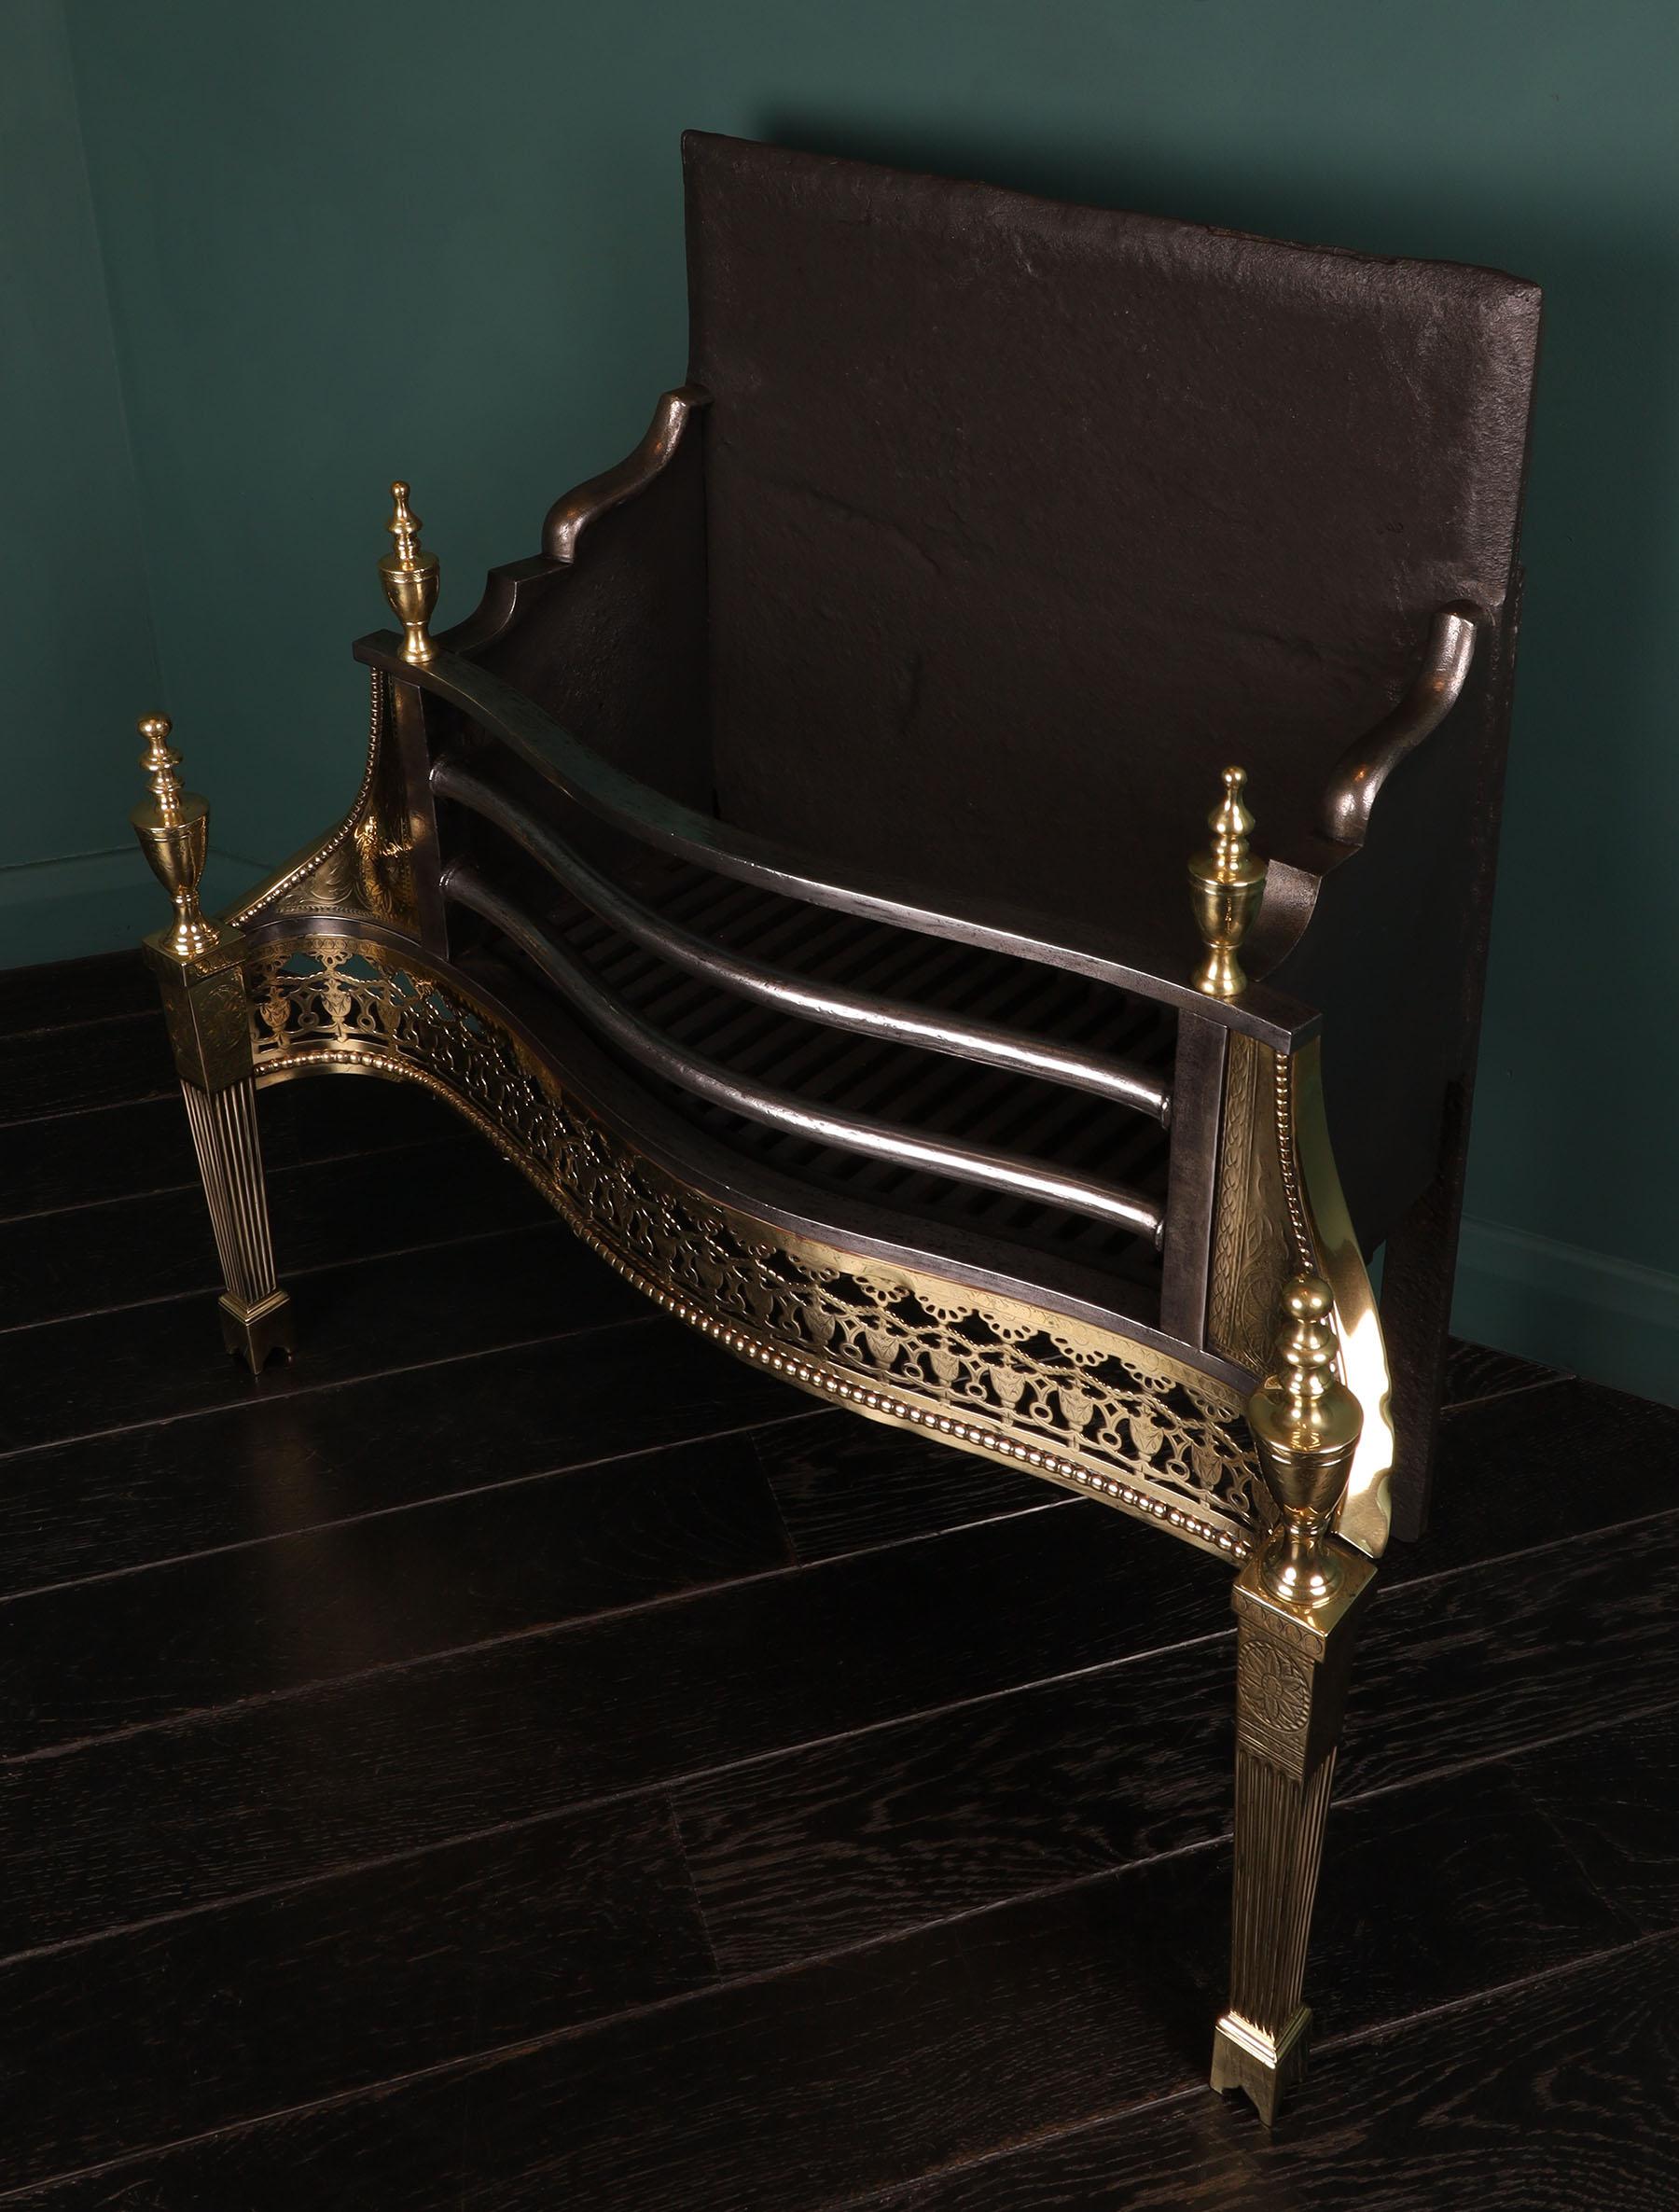 An elegant brass & steel serpentine fire grate by Longden. The railed basket supported by tapered uprights on arched plinthed feet. The ornate frieze consisting of engraved urns and palmettes set over beaded moulding. Intricate engraving to wings